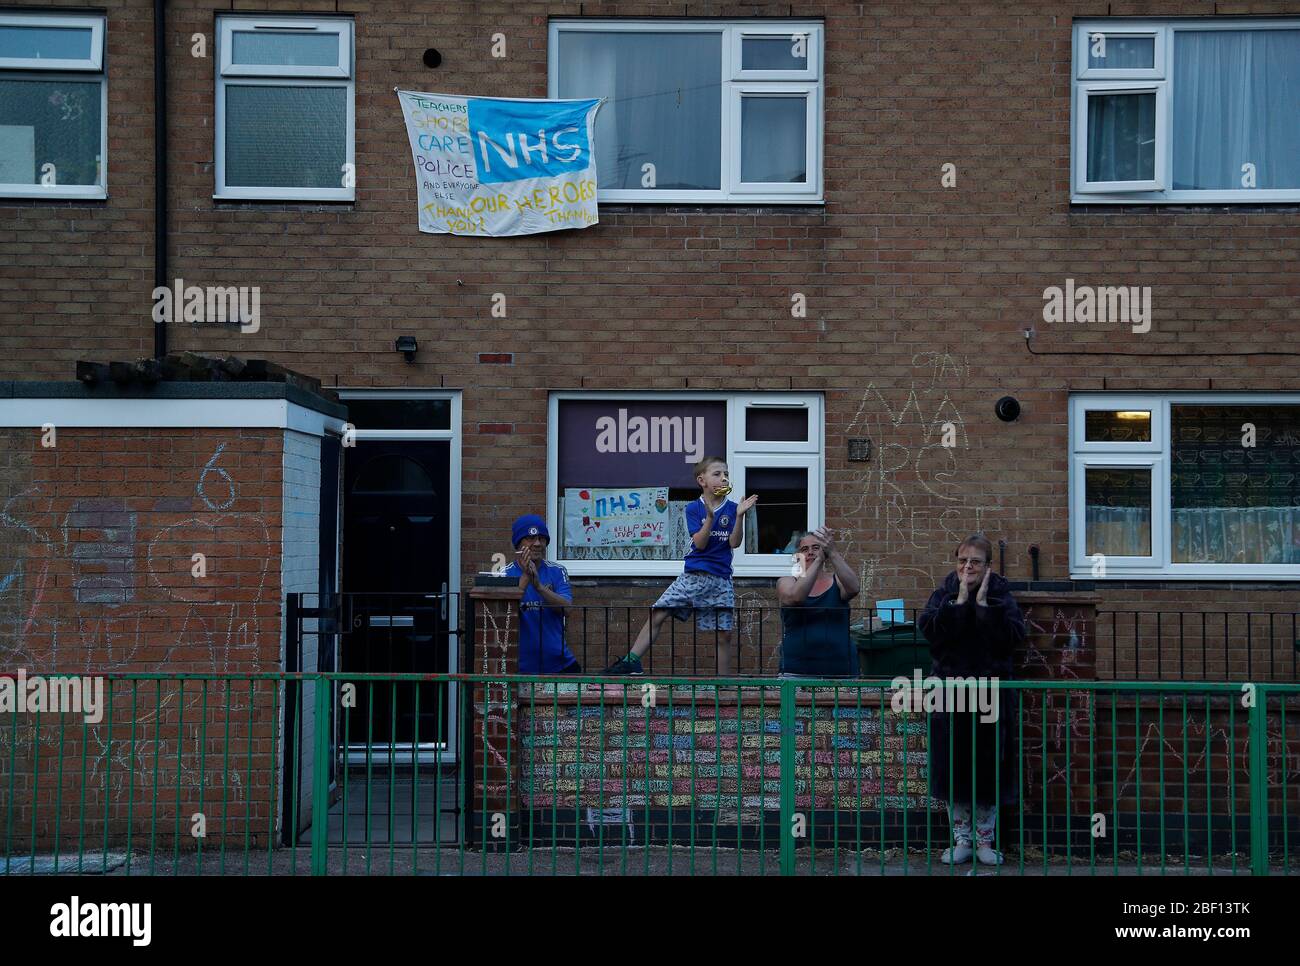 Loughborough, Leicestershire, UK. 16th April 2020. Residents applaud to show their appreciation for NHS workers in the fourth Clap for Carers event during the coronavirus pandemic lockdown. Credit Darren Staples/Alamy Live News. Stock Photo